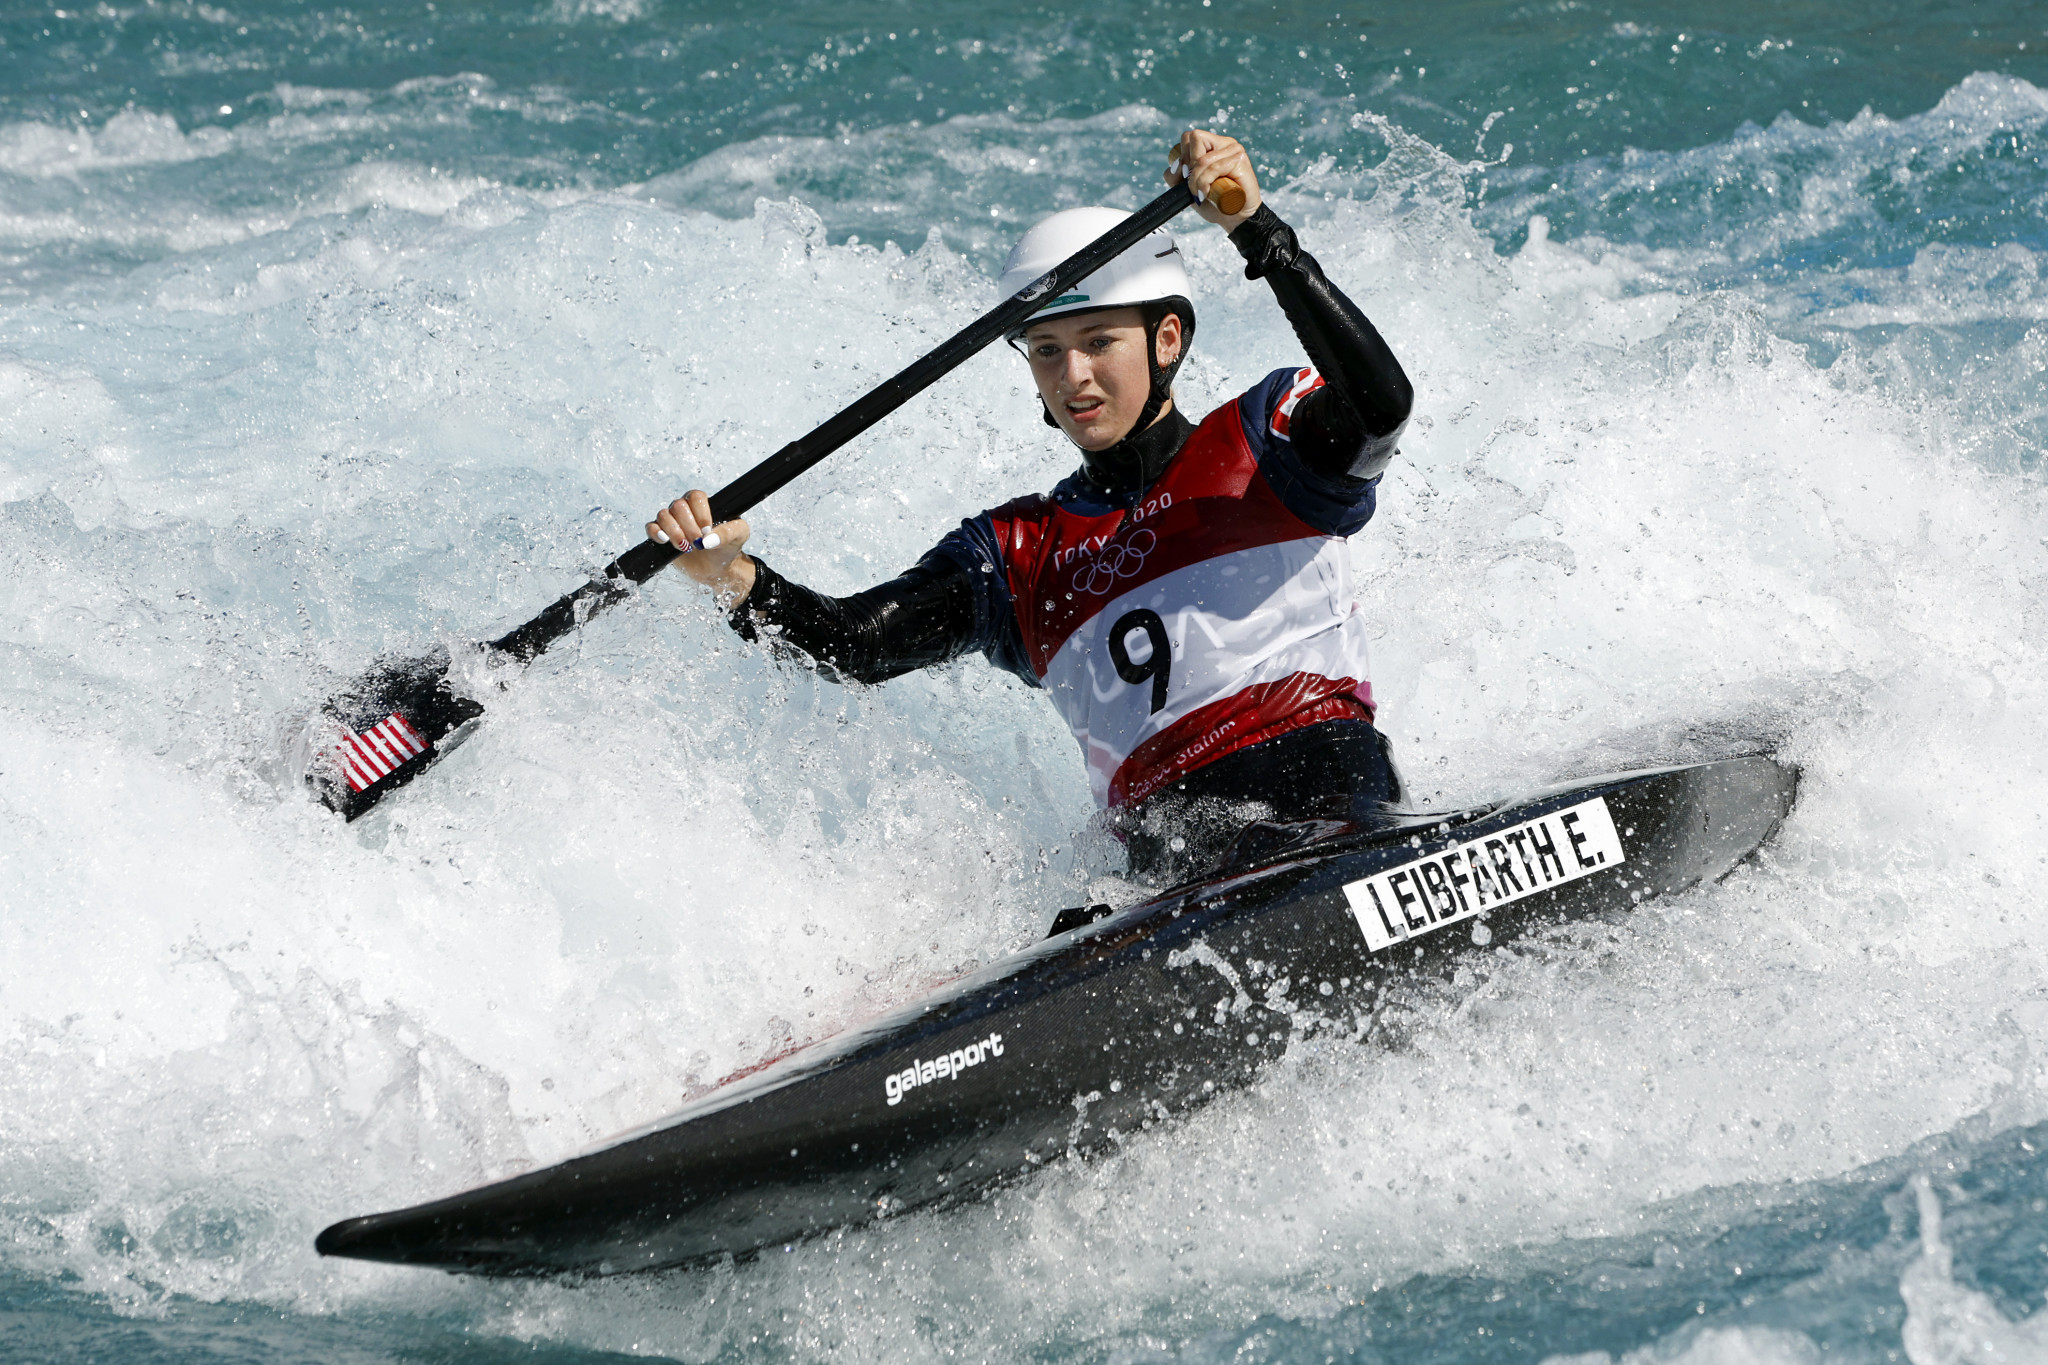 Leibfarth excels at Pan American Canoe Slalom Championships